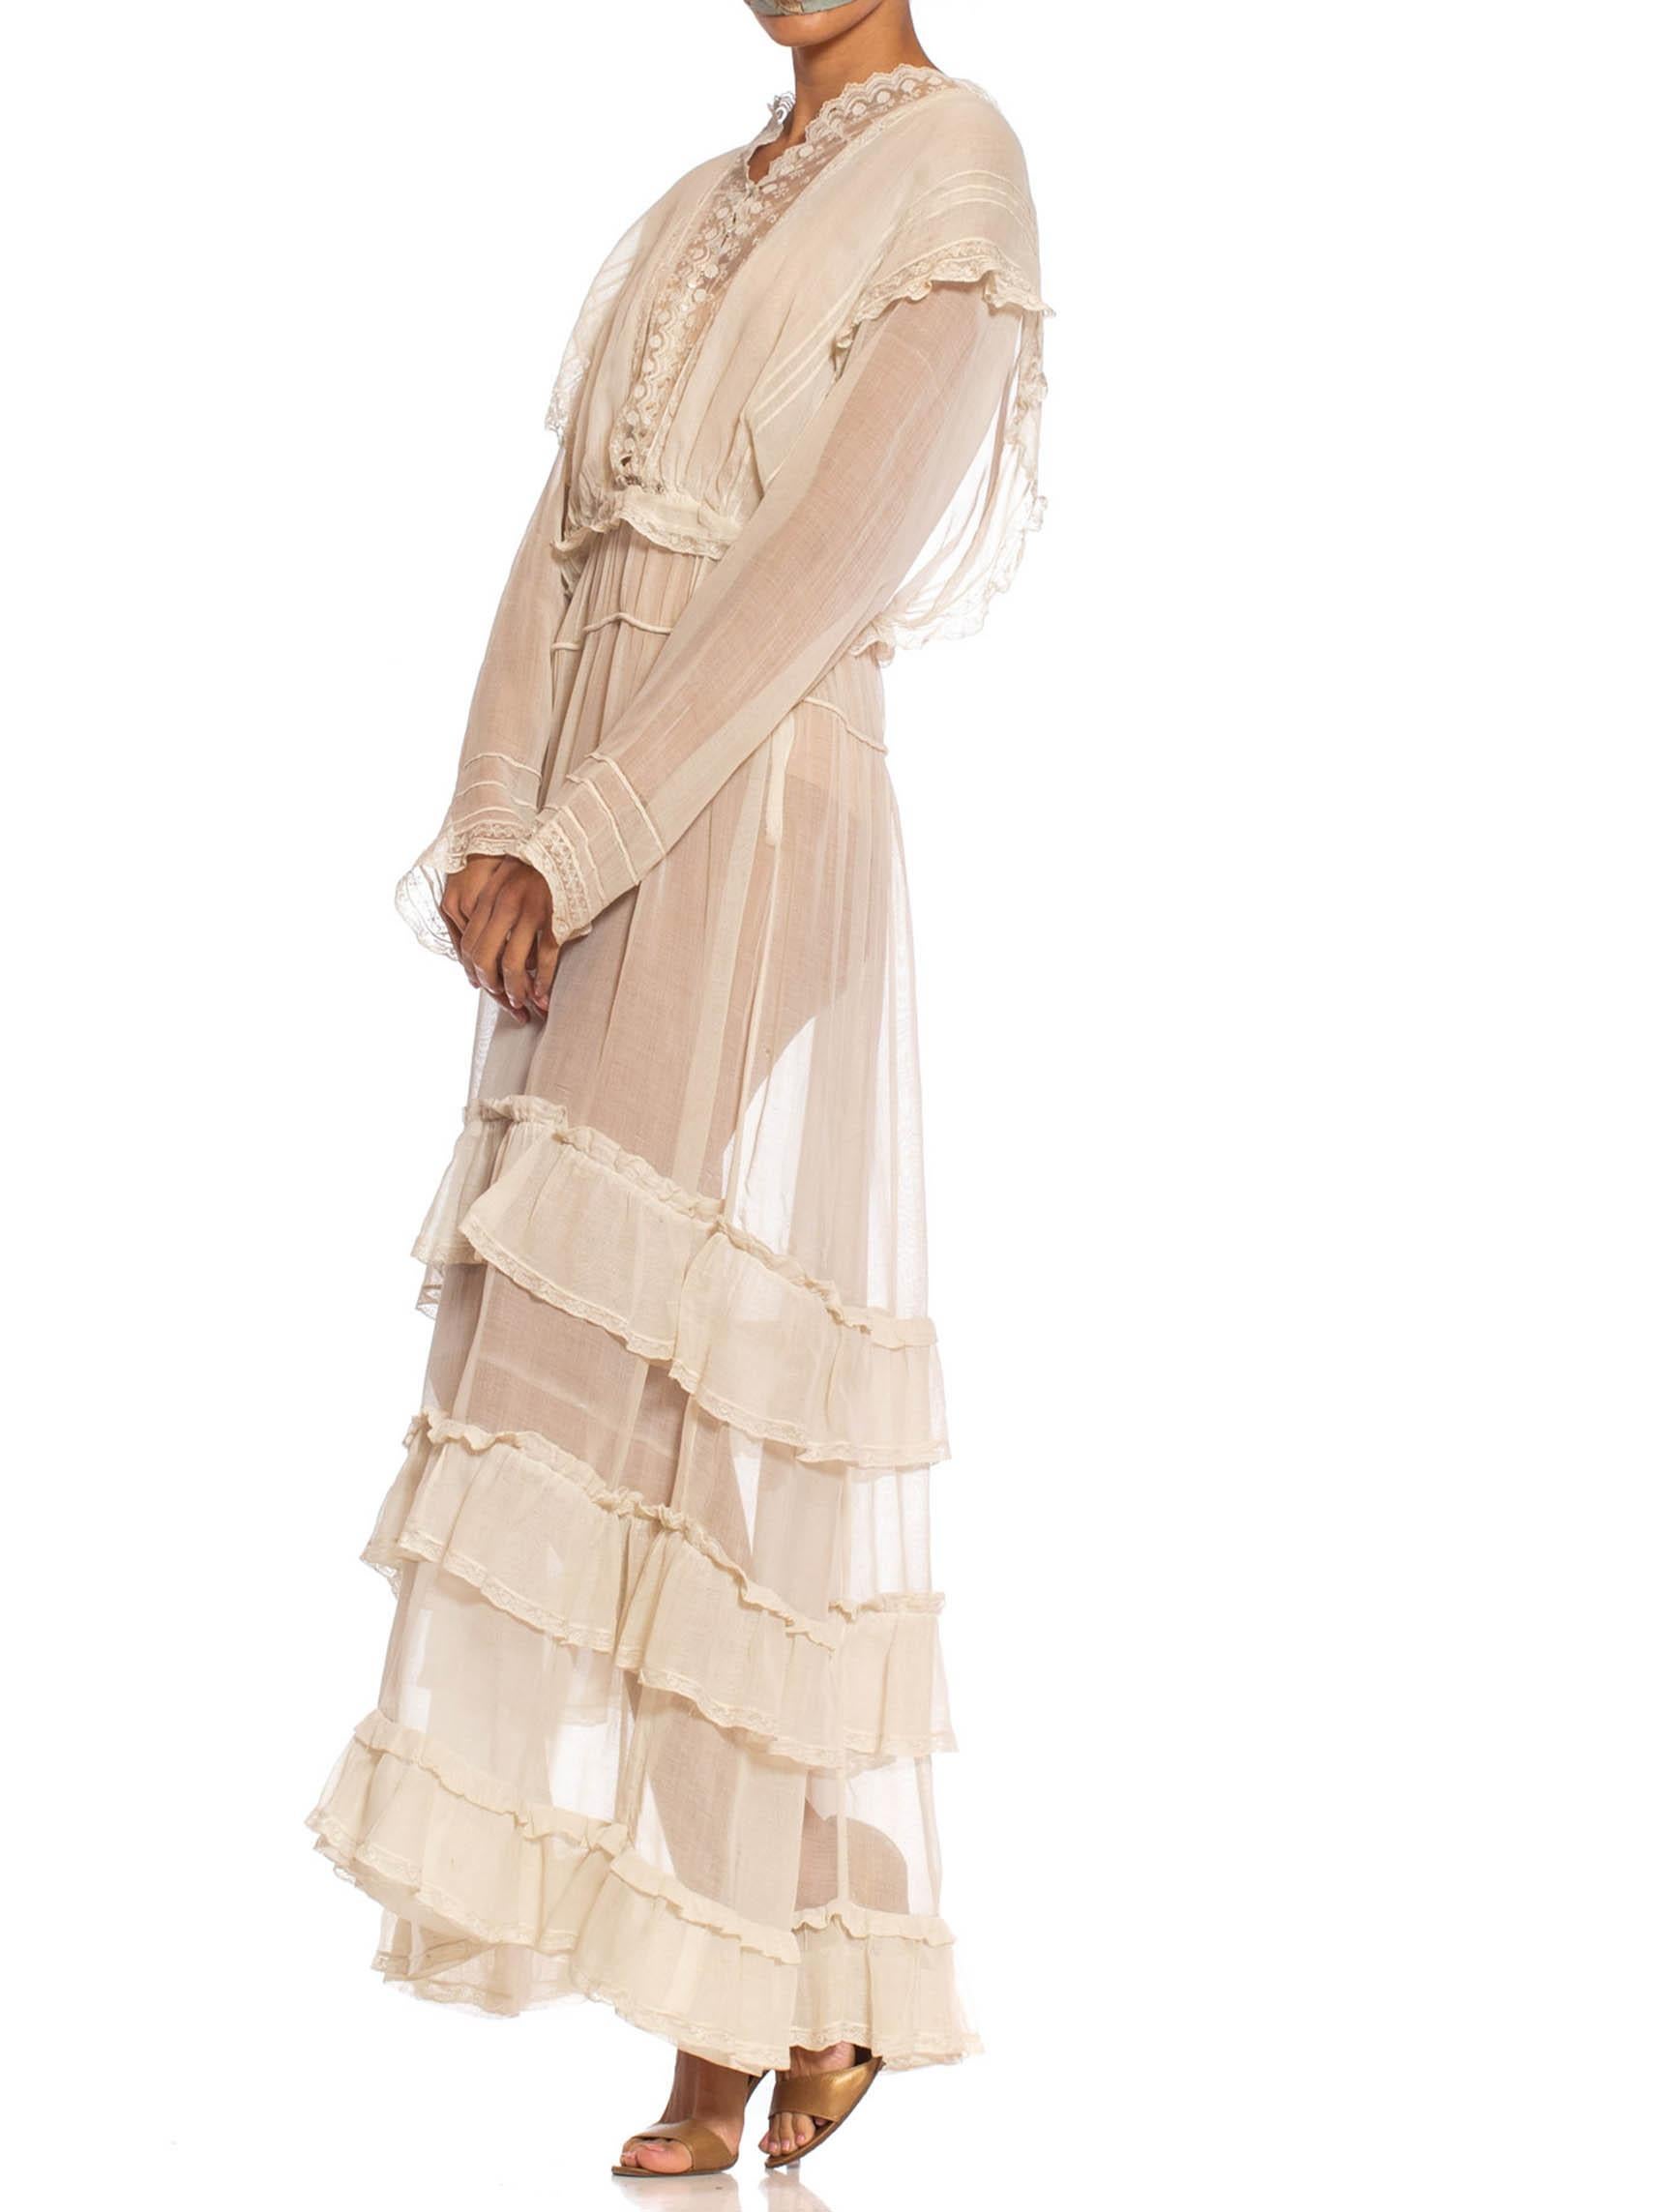 Edwardian Off White Organic Cotton Voile & Lace Long Sleeved Ruffled Tea Dress 6